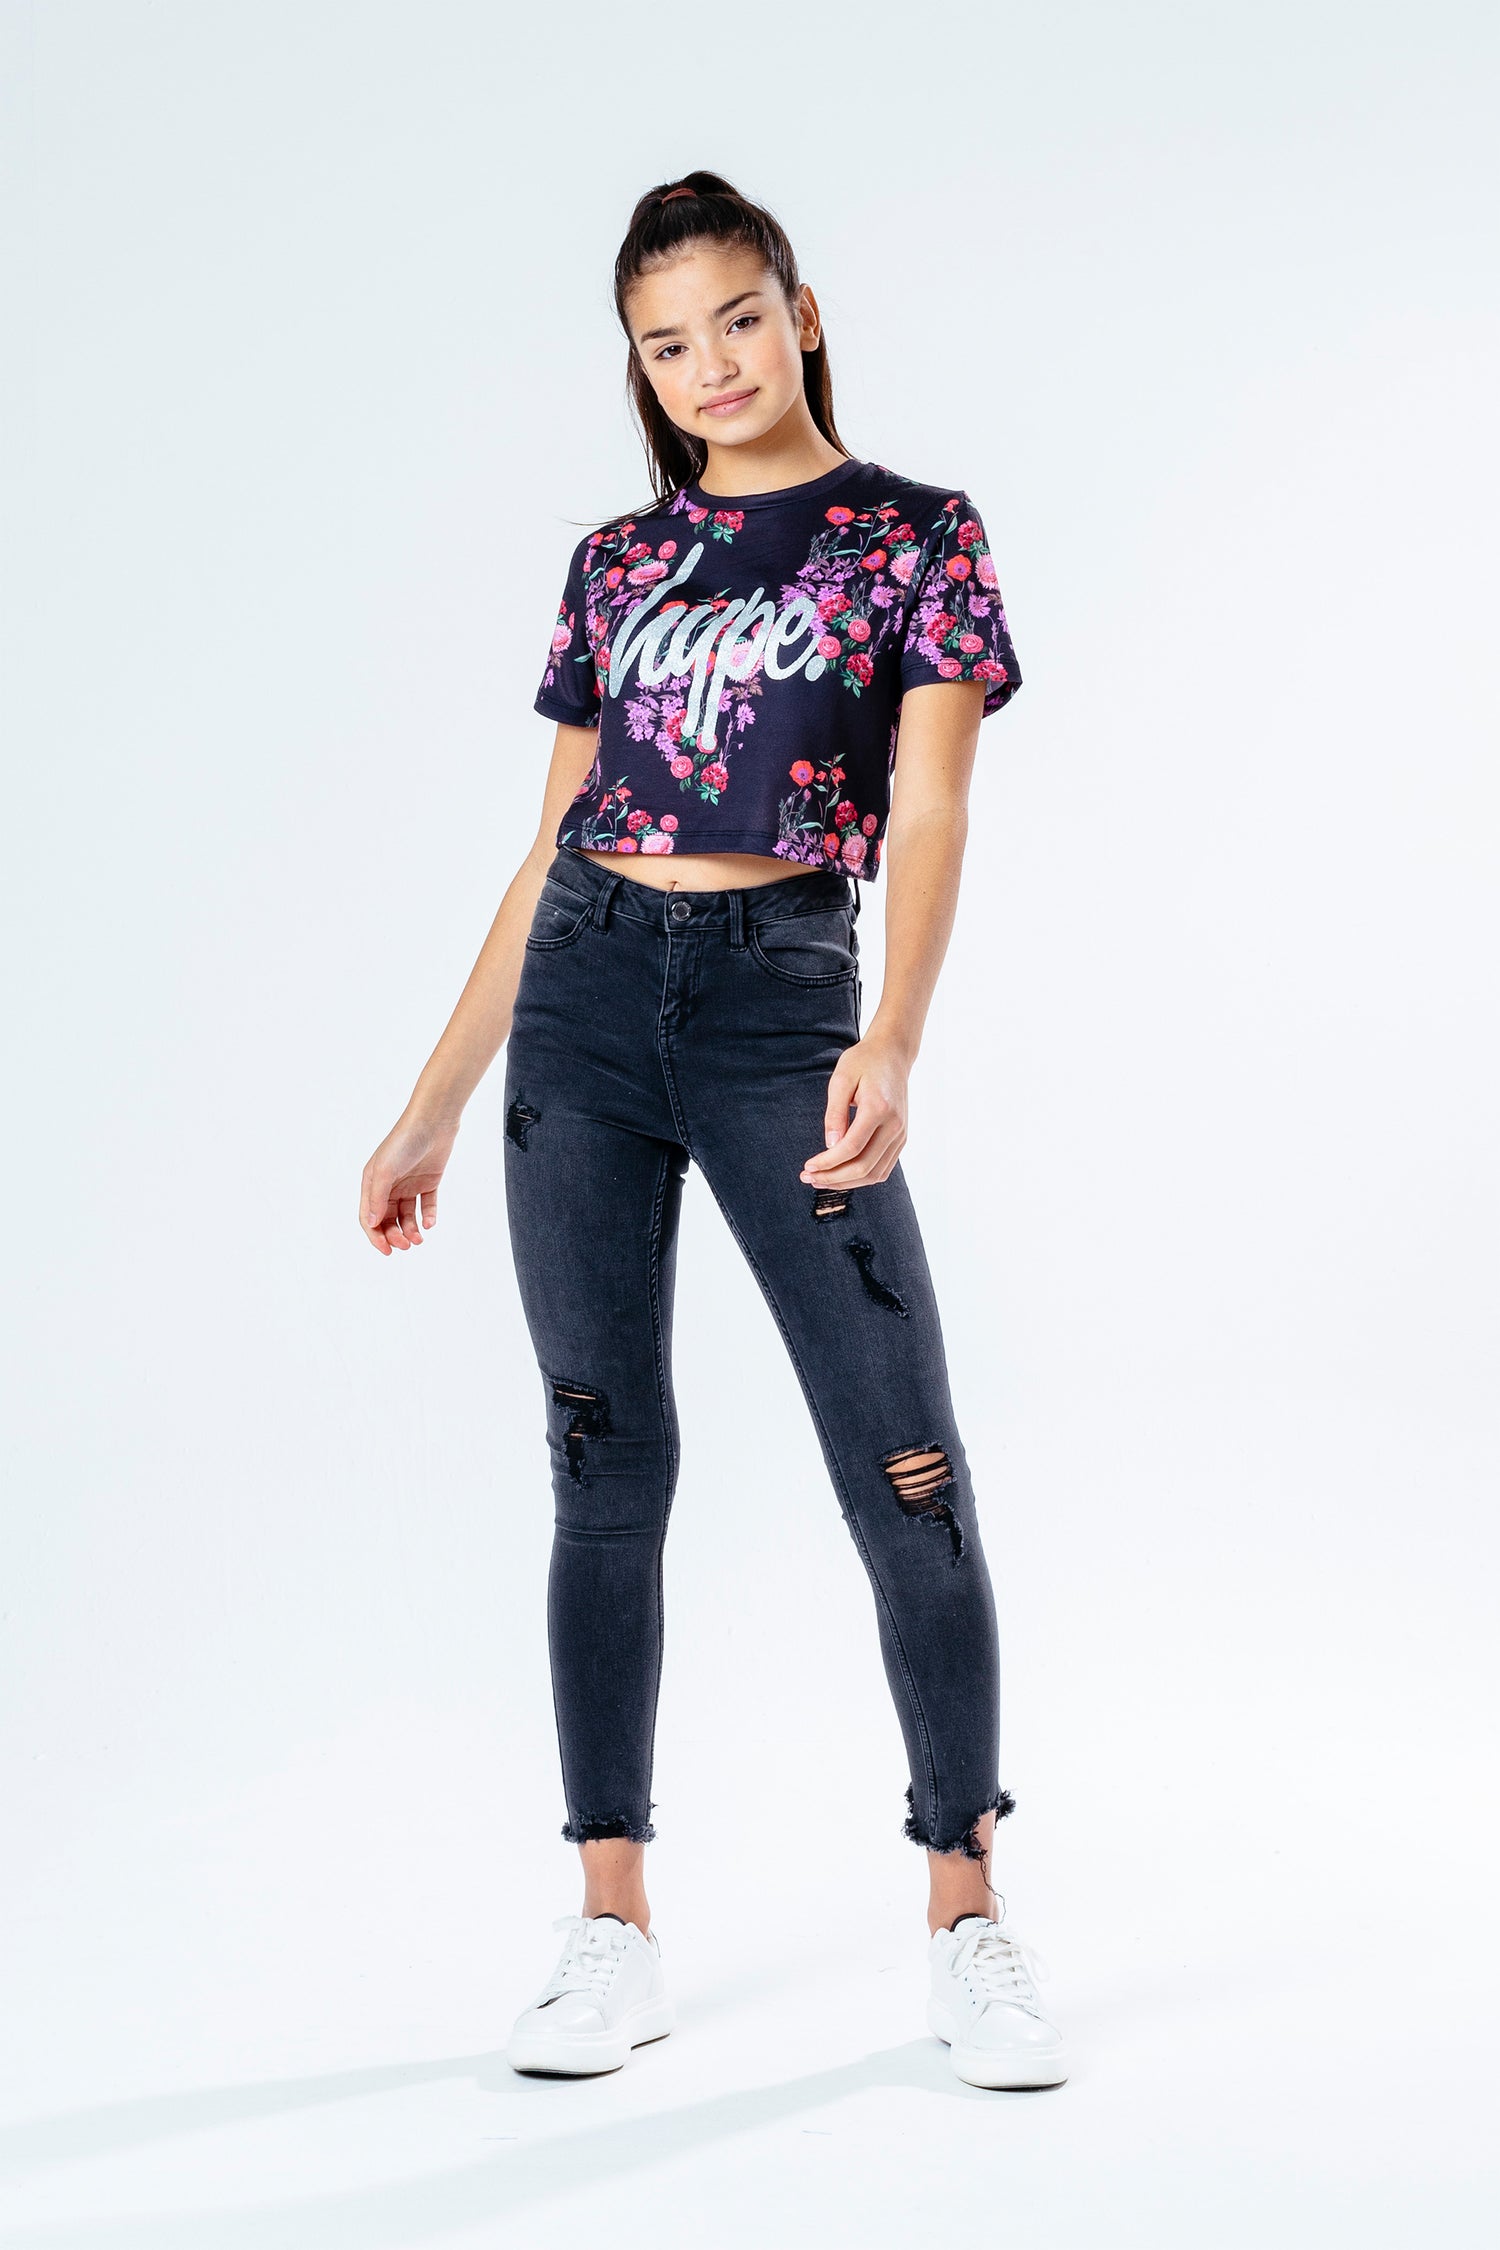 HYPE DITSY FLORAL GIRLS CROP T-SHIRT